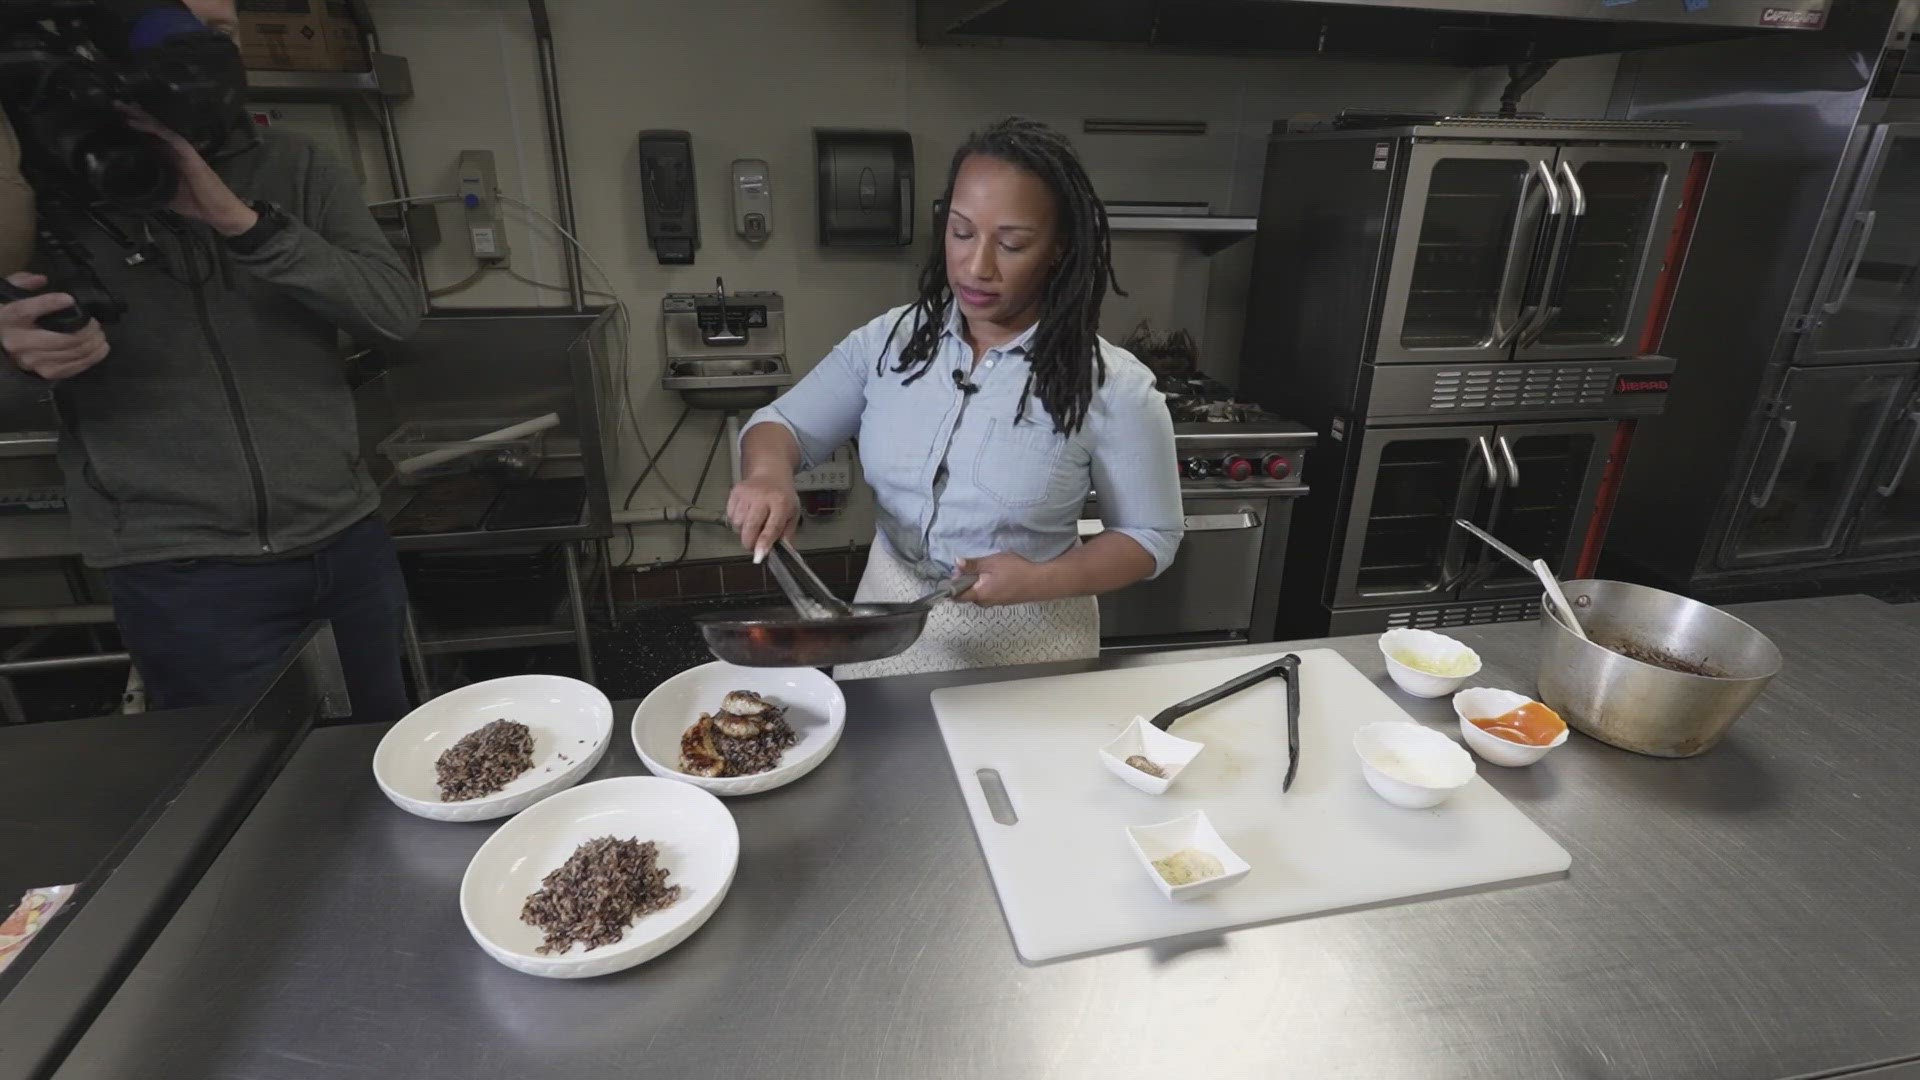 Chef Amber Williams of Le Rouge Cuisine Food Company, shares recipes using ingredients from food distribution organizations